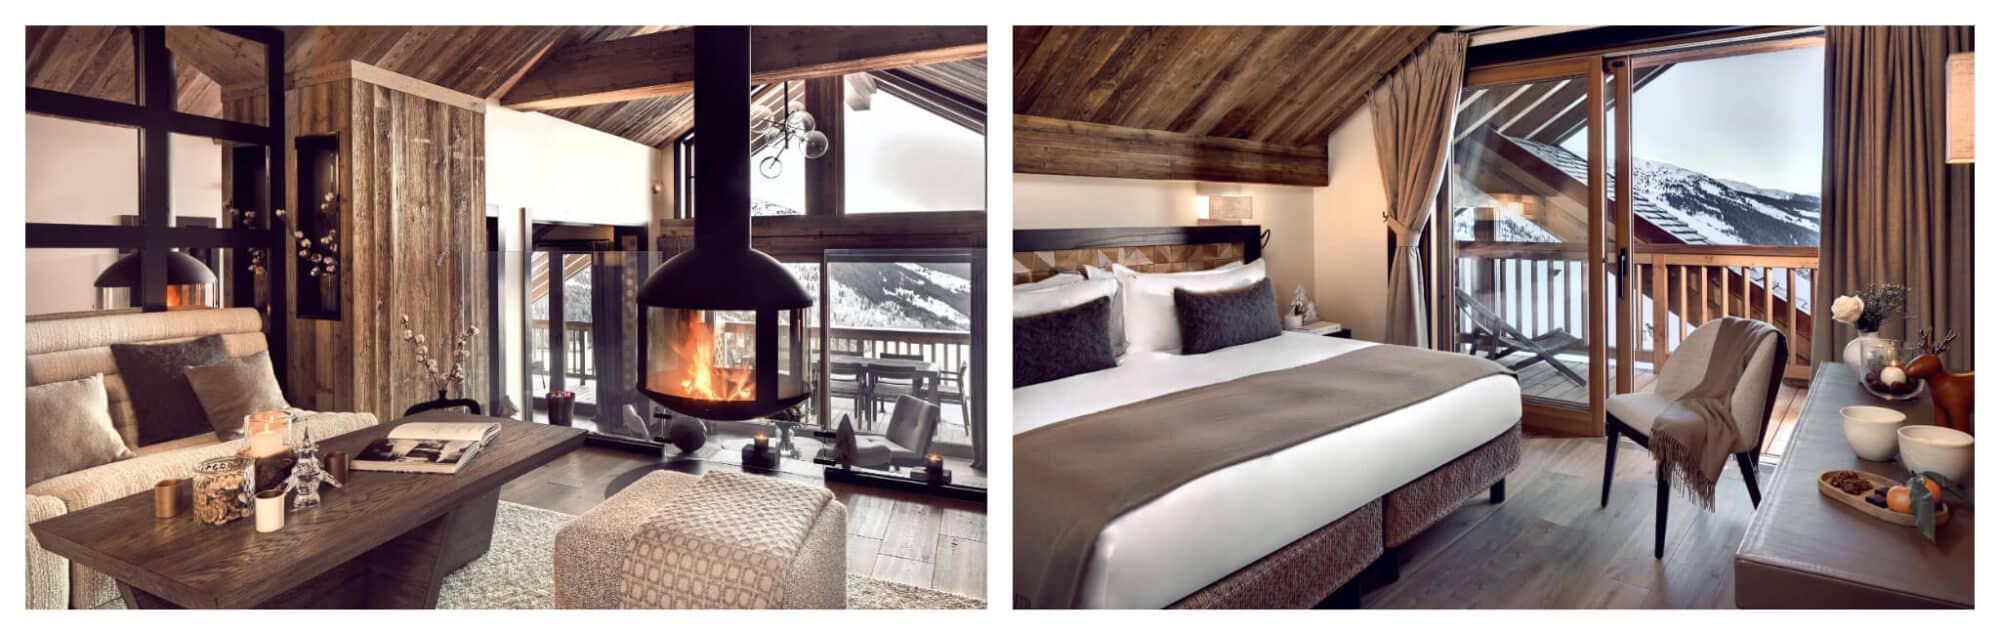 Left: A living room in Antares ski resort with beige sofa, soft furnishings in neutral colors, and a cozy fireplace in the middle. Right: A hotel room at the resort with a white bed, neutral accessories and a view of the snowy mountains outside.